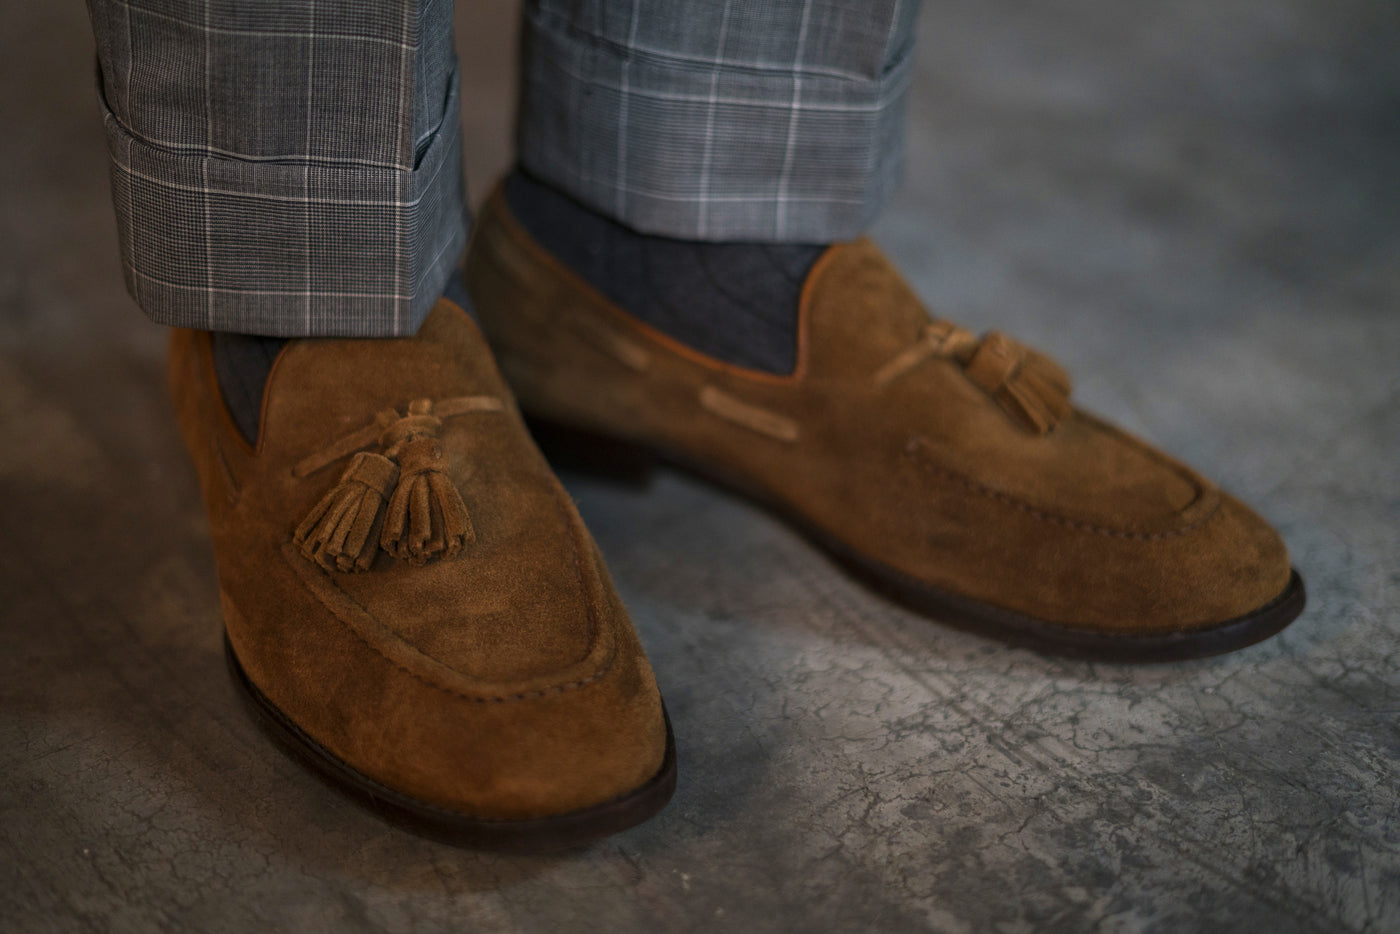 Takt tandlæge zebra How to Wear Suede Loafers - Beckett & Robb